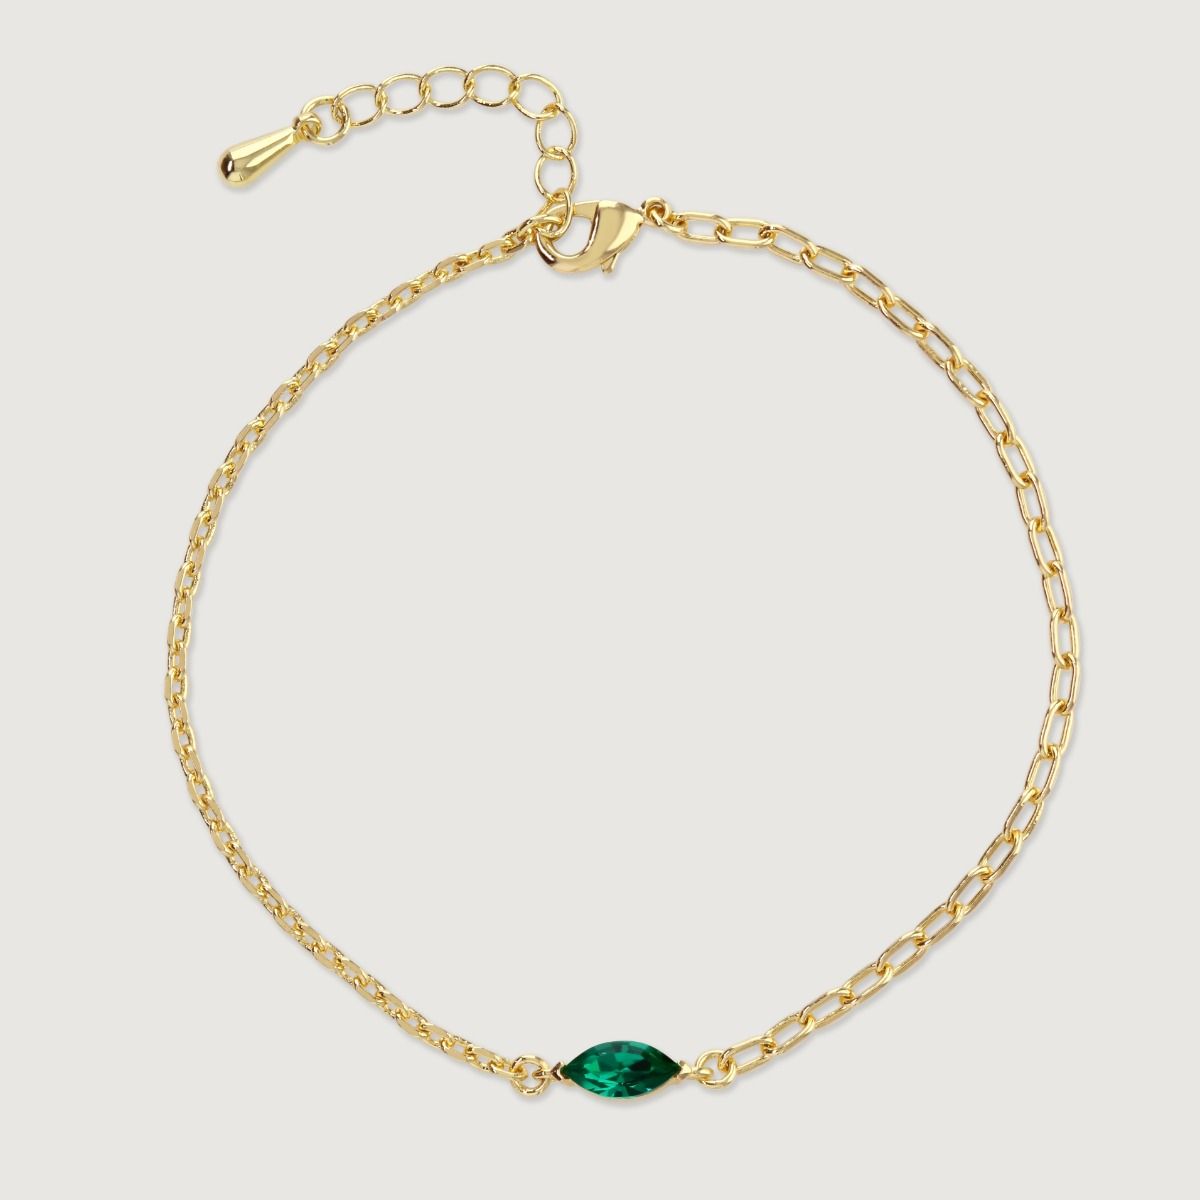 The Marquise Duo Chain Bracelet creatively blends fine and sturdy link chains, culminating in an eye-catching marquise stone at its centre. The vivid stone's pairing with the chains makes it a remarkable choice for layering with other chains or wearing as